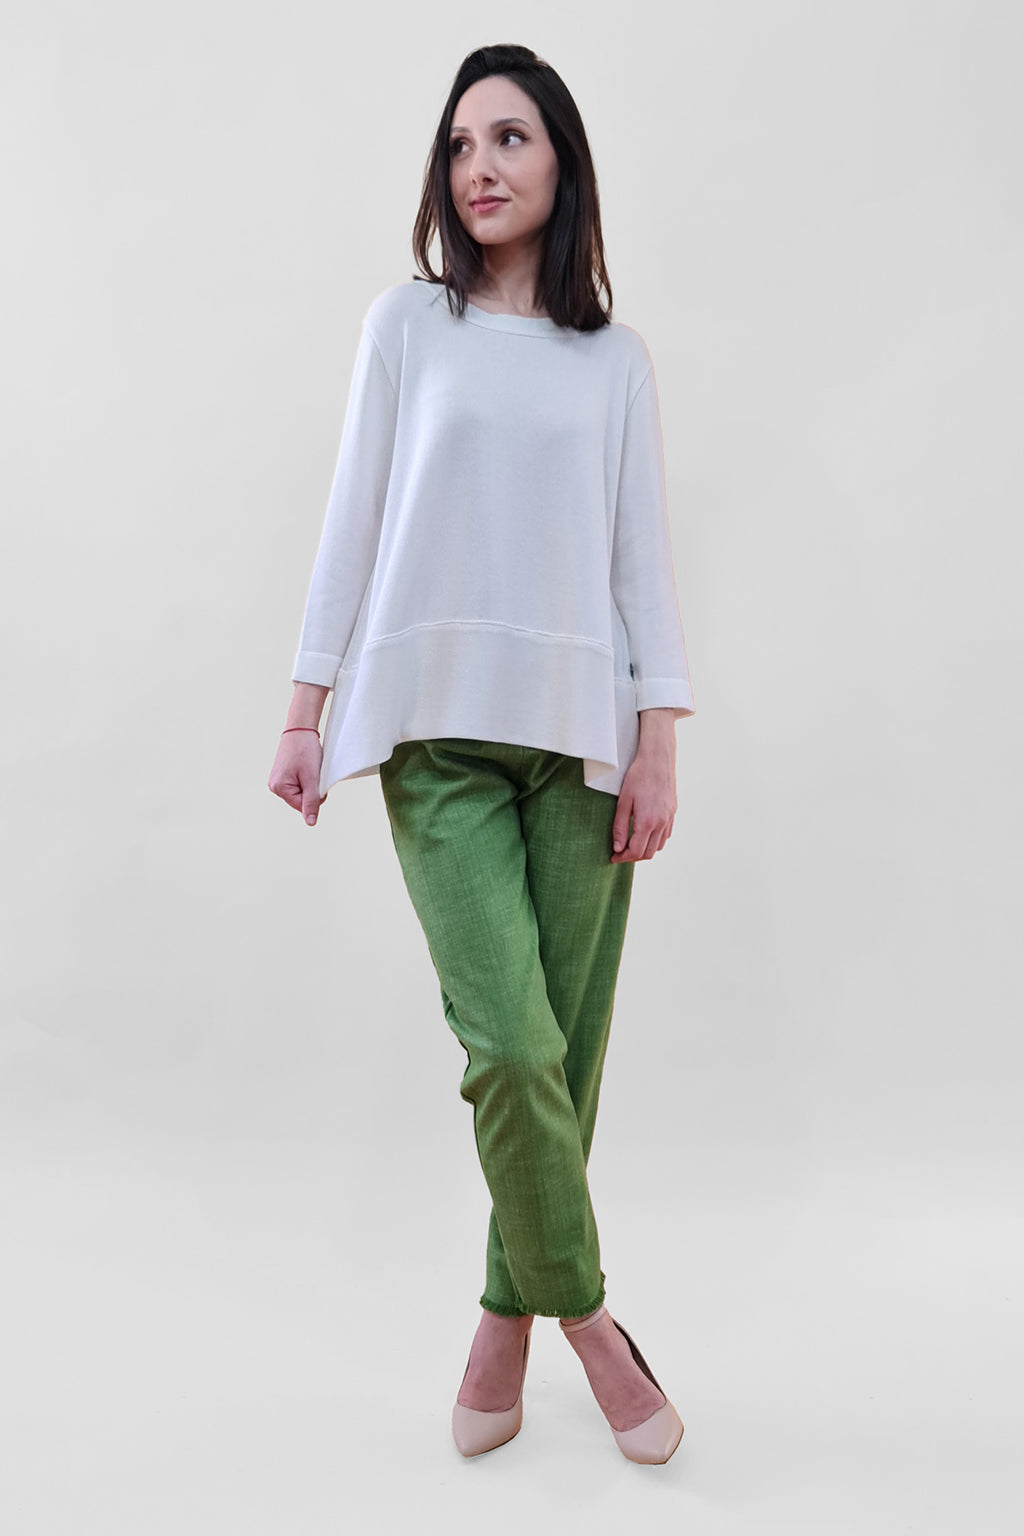 Woman in white sweater and green pants posing against a plain background